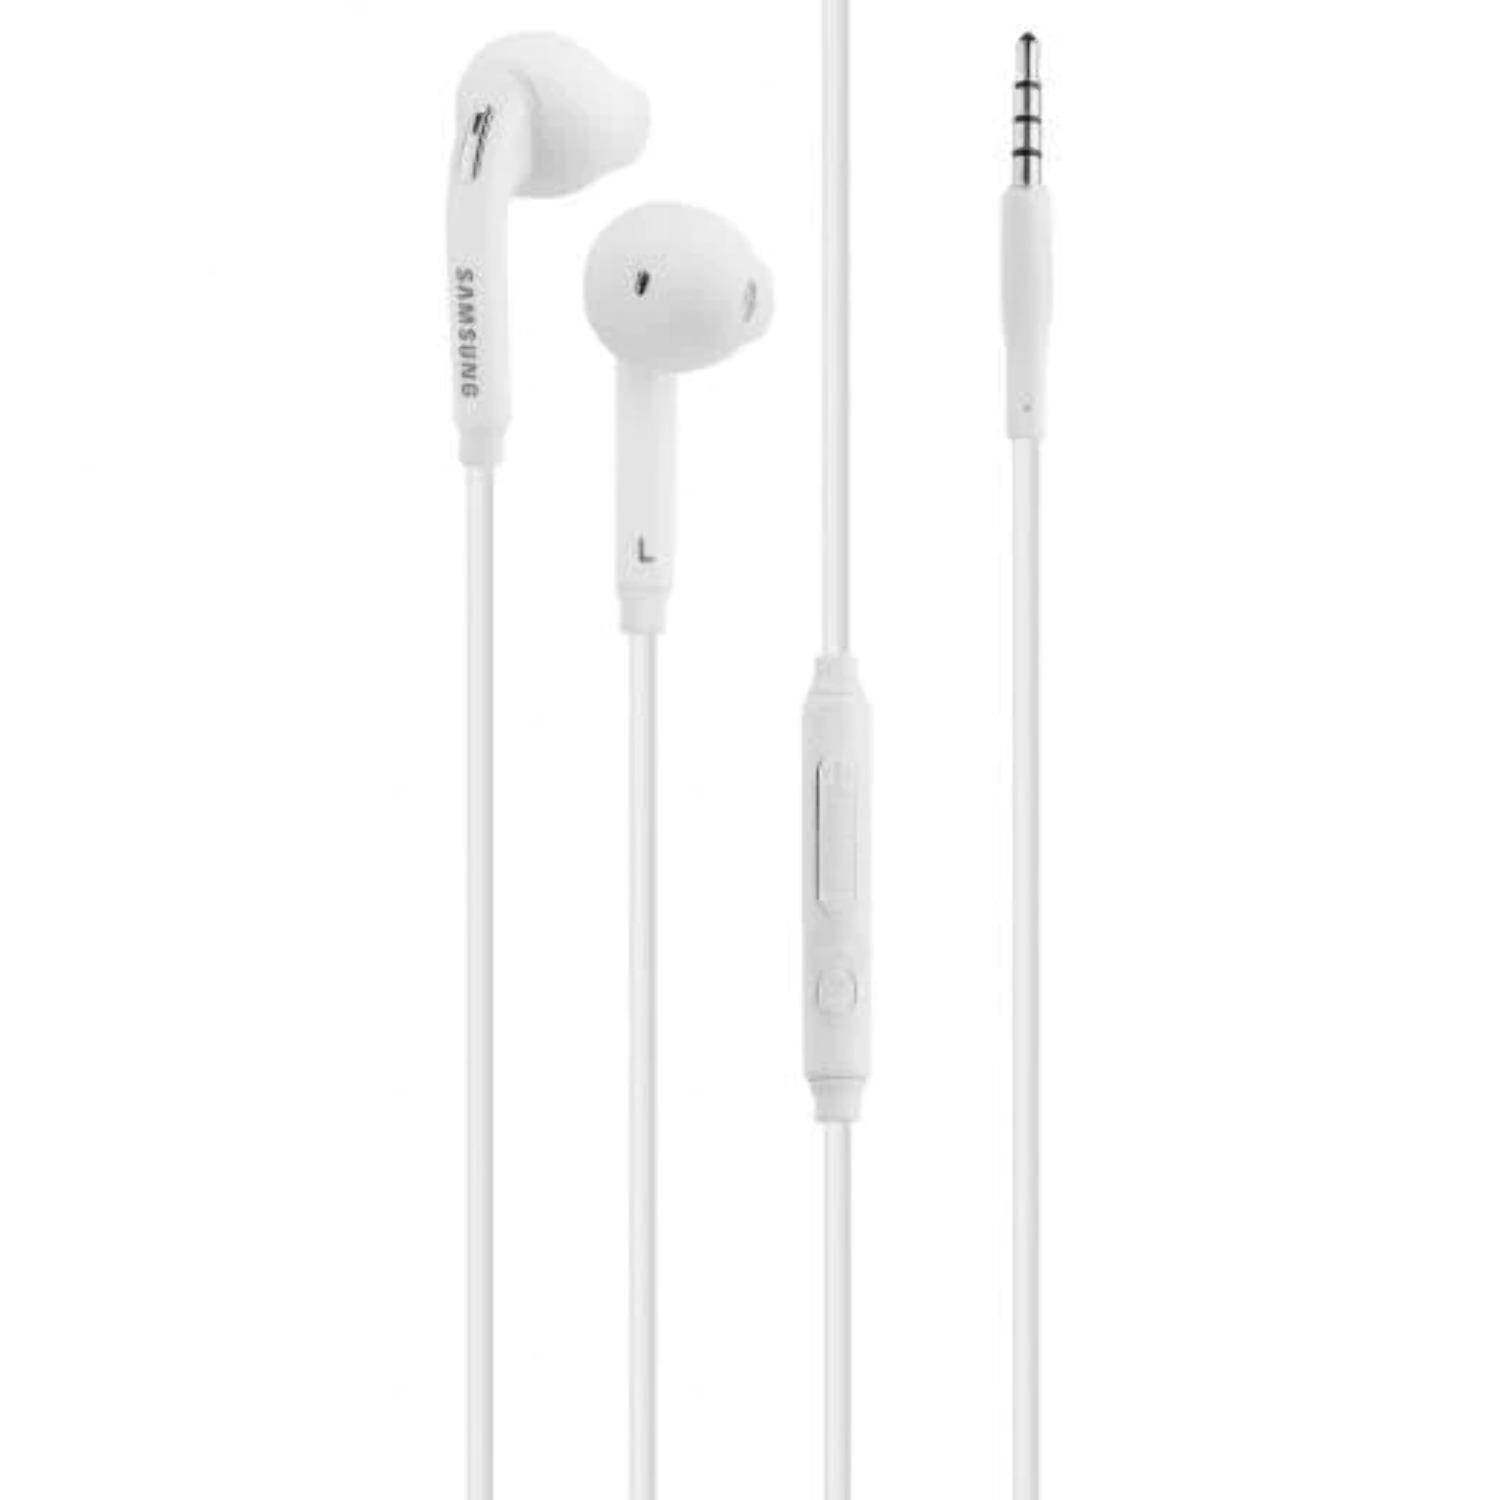 Premium Wired Headset 3.5mm Earbud Stereo In-Ear Headphones with in-line Remote & Microphone Compatible with BlackBerry Z30 - image 1 of 1